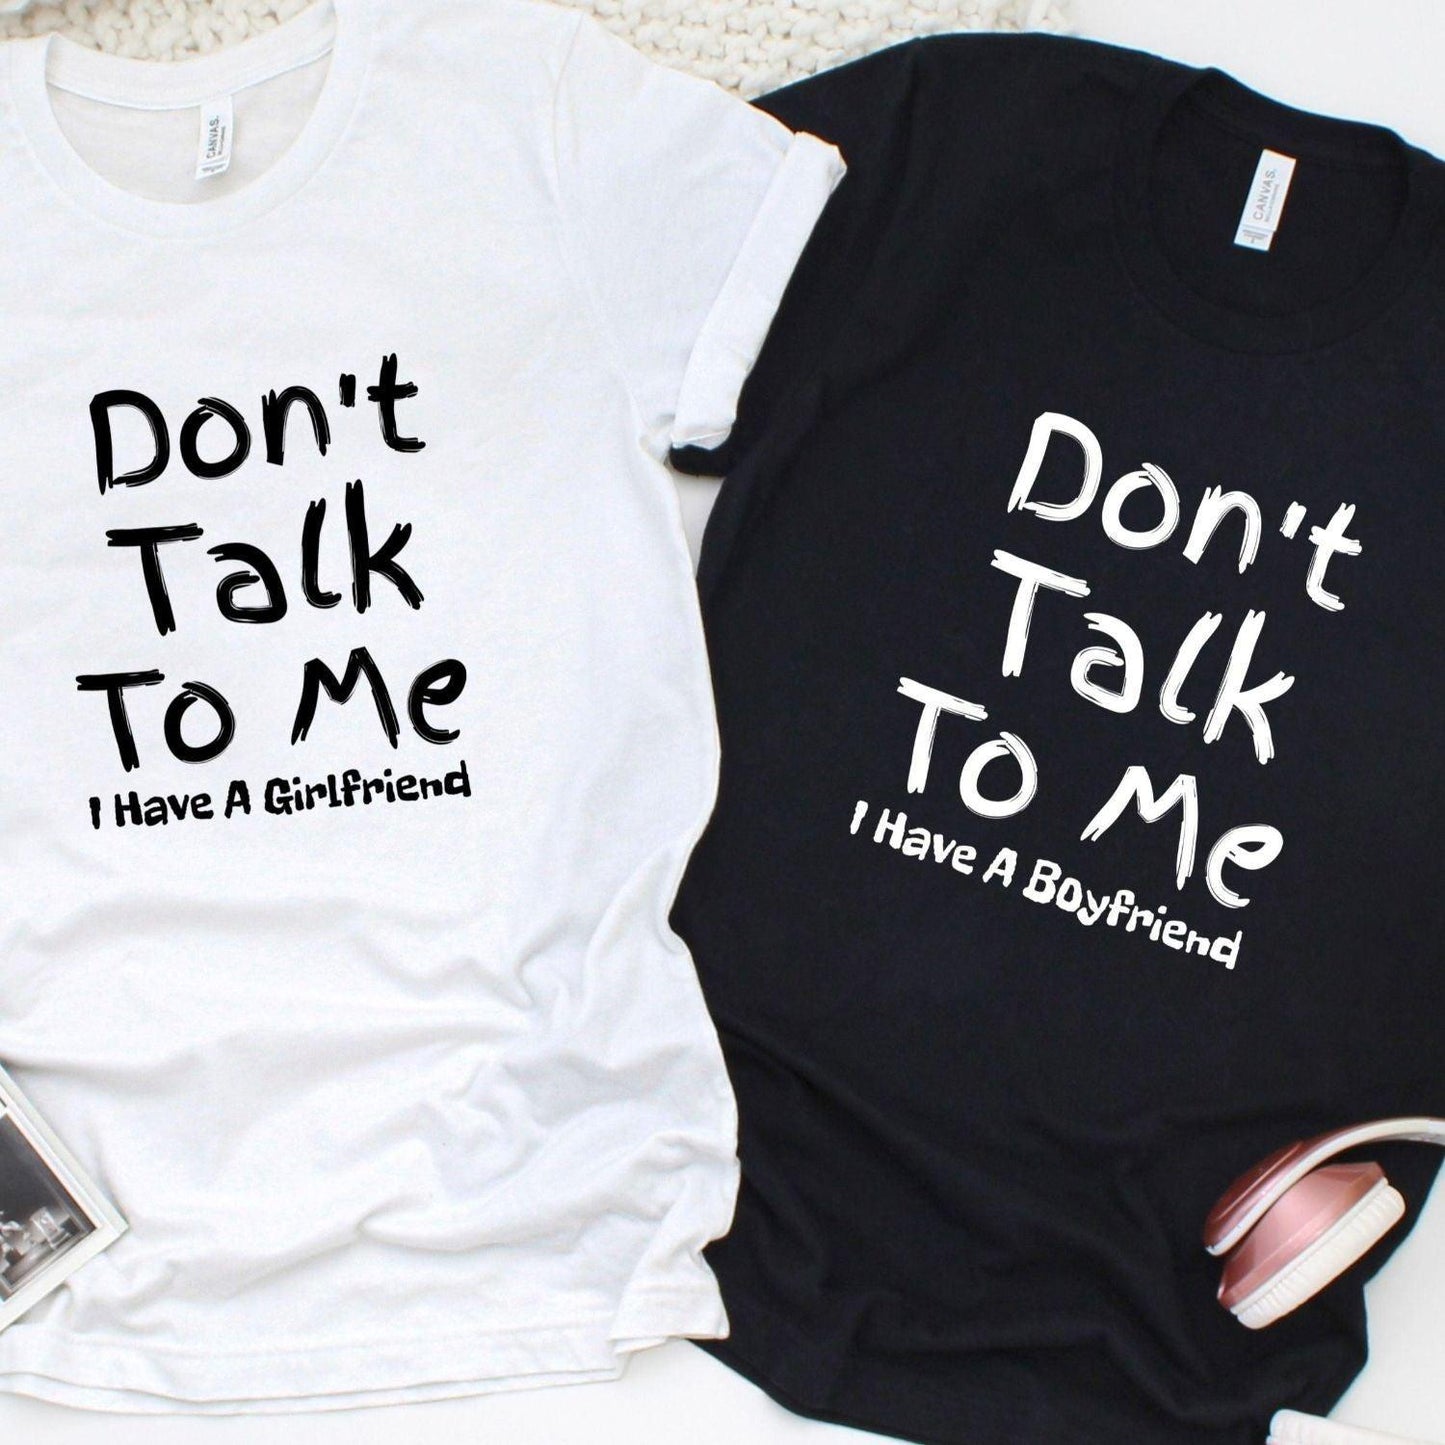 Don't Talk To Me! Matching Outfits for Couples - Girlfriend/Boyfriend - 4Lovebirds